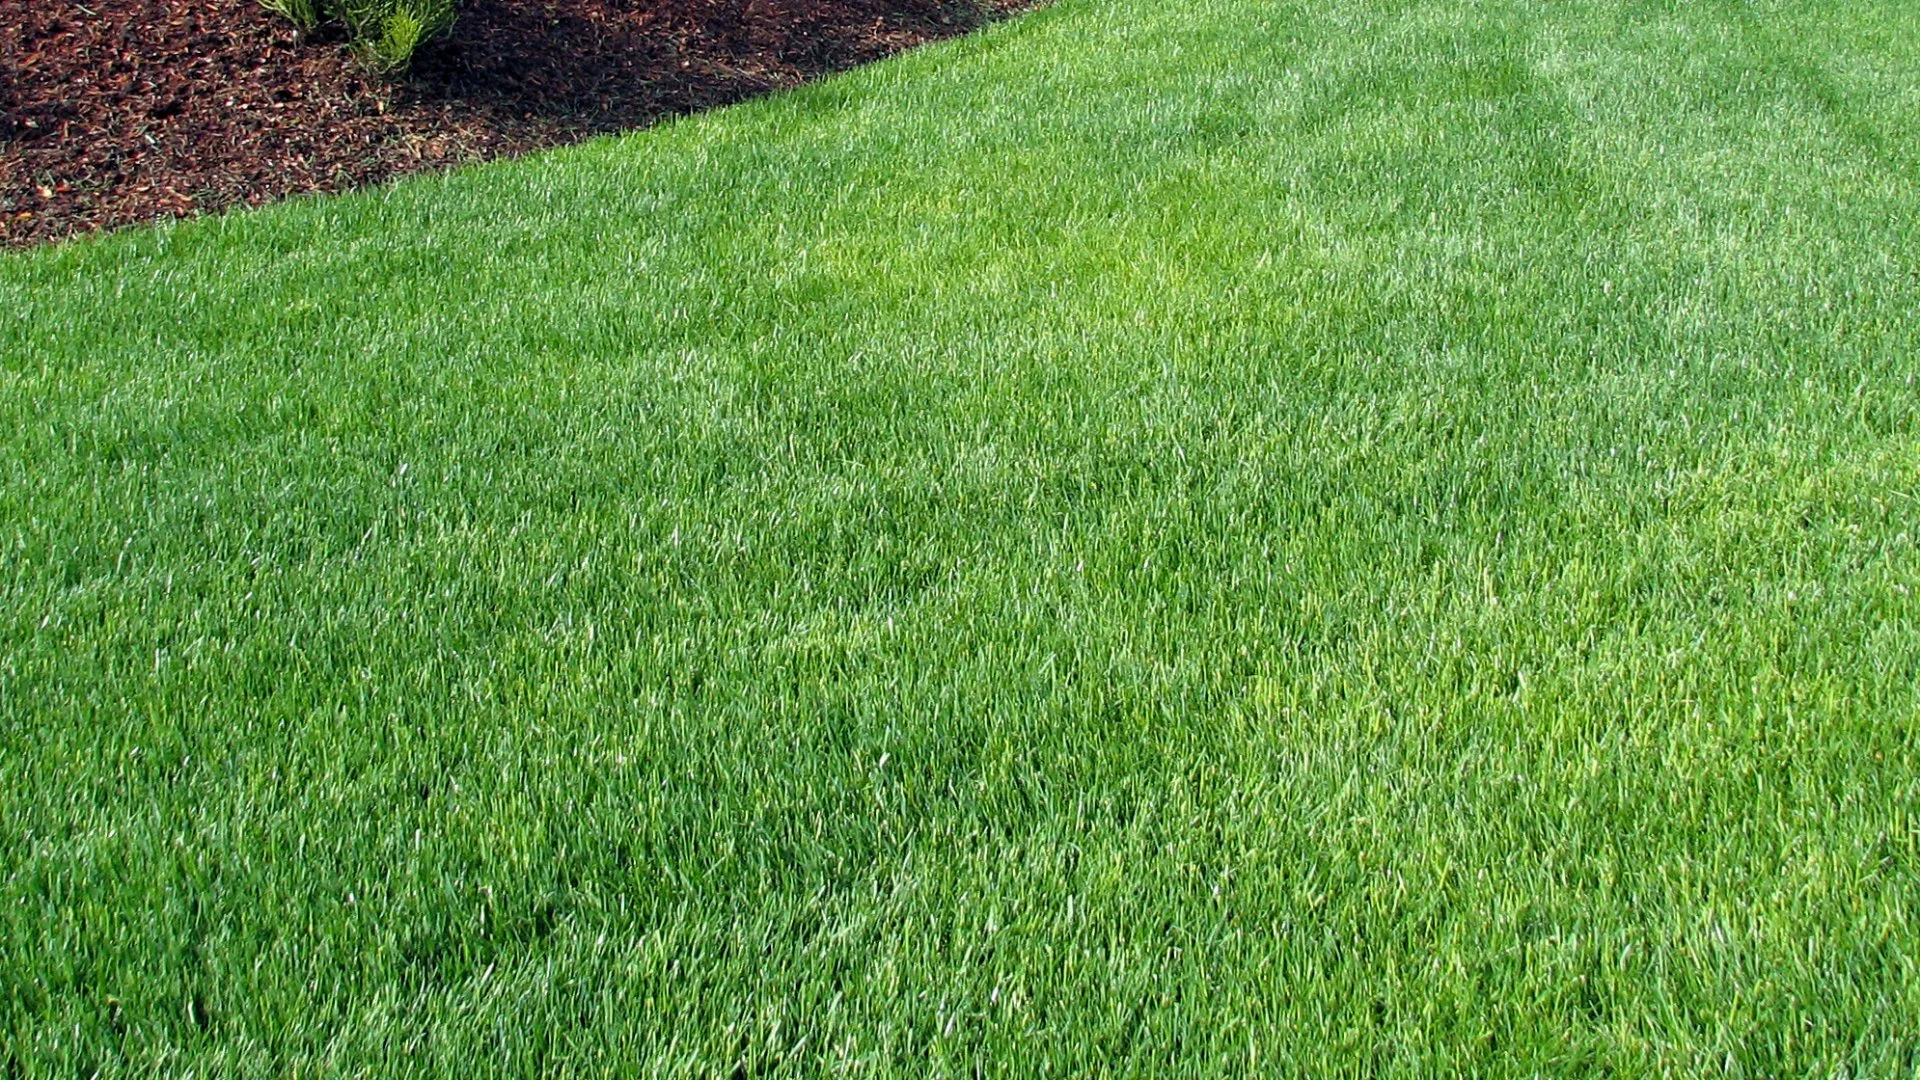 Is It Better to Use Granular or Liquid Fertilizer for Your Lawn in Ohio?